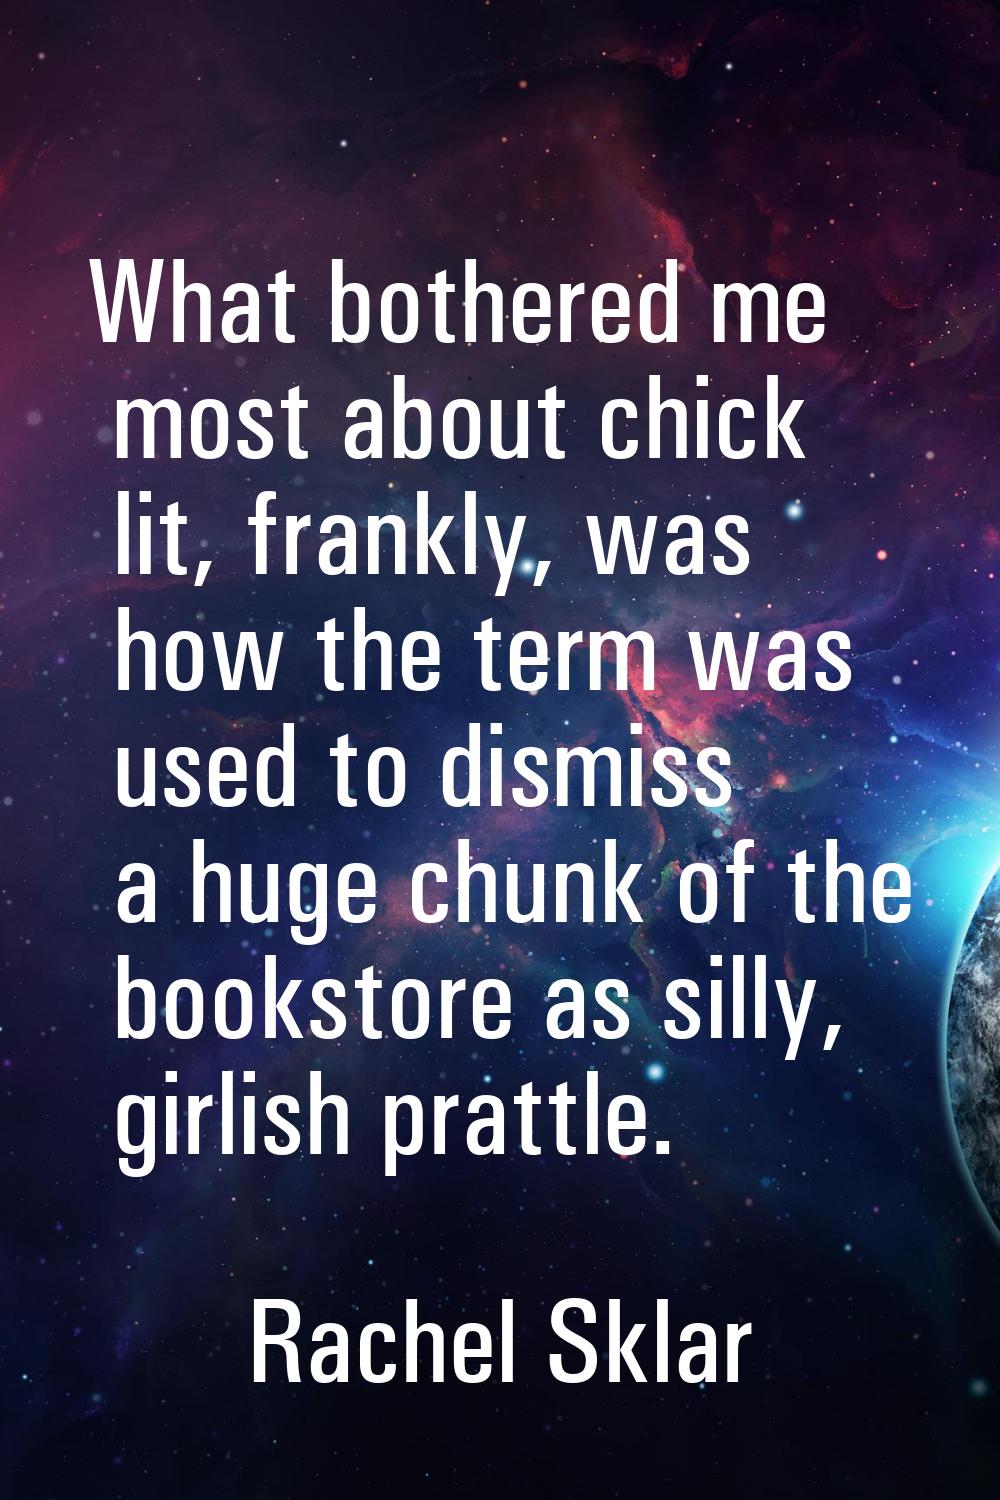 What bothered me most about chick lit, frankly, was how the term was used to dismiss a huge chunk o